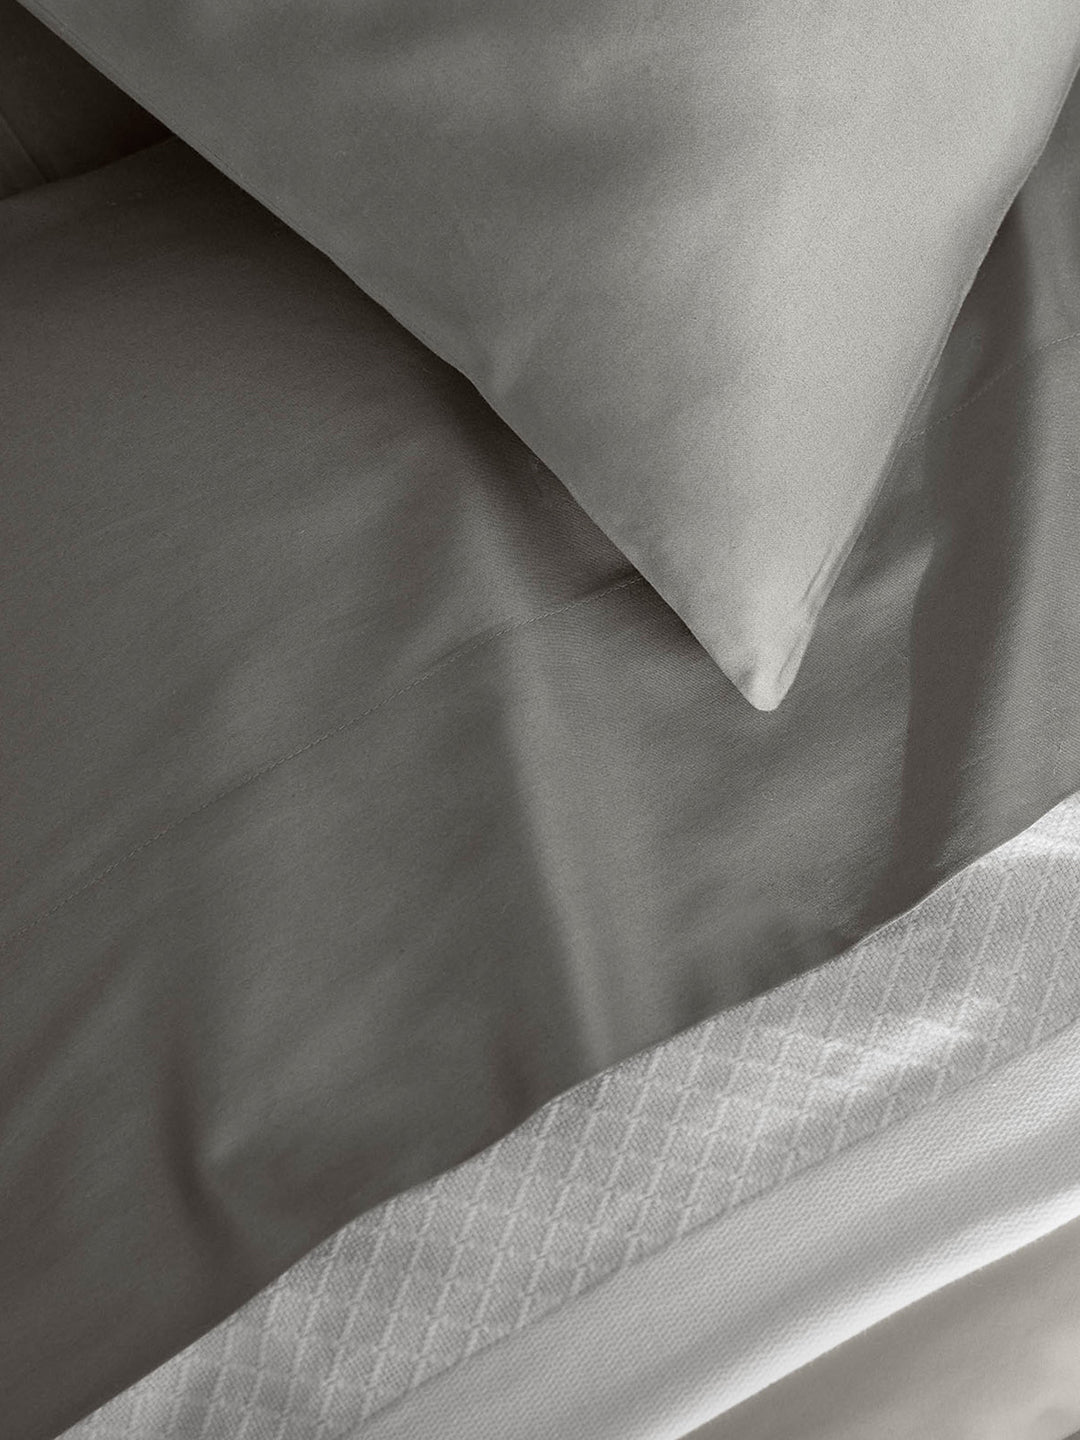 High Thread Count Bed Sheets - Fog - 600 TC